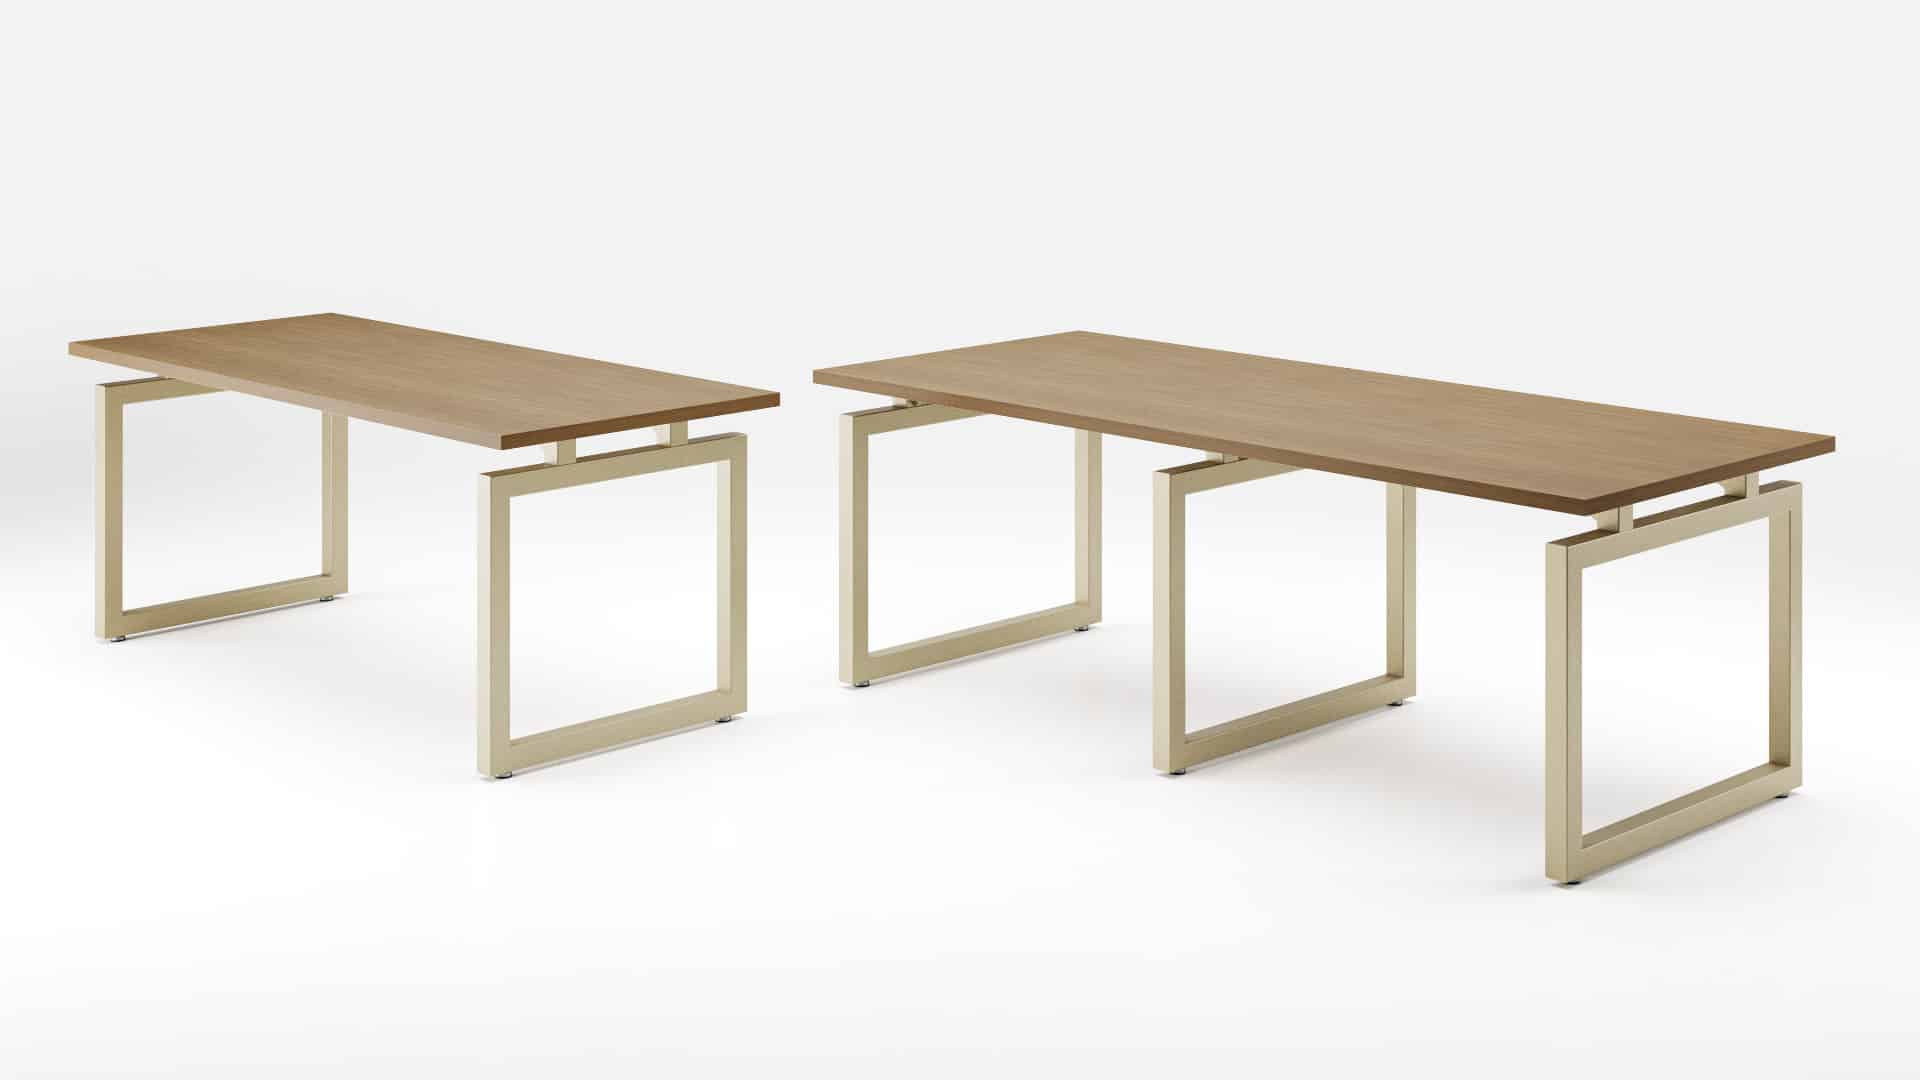 Coby Square Cafe tables - rectangular in two lengths